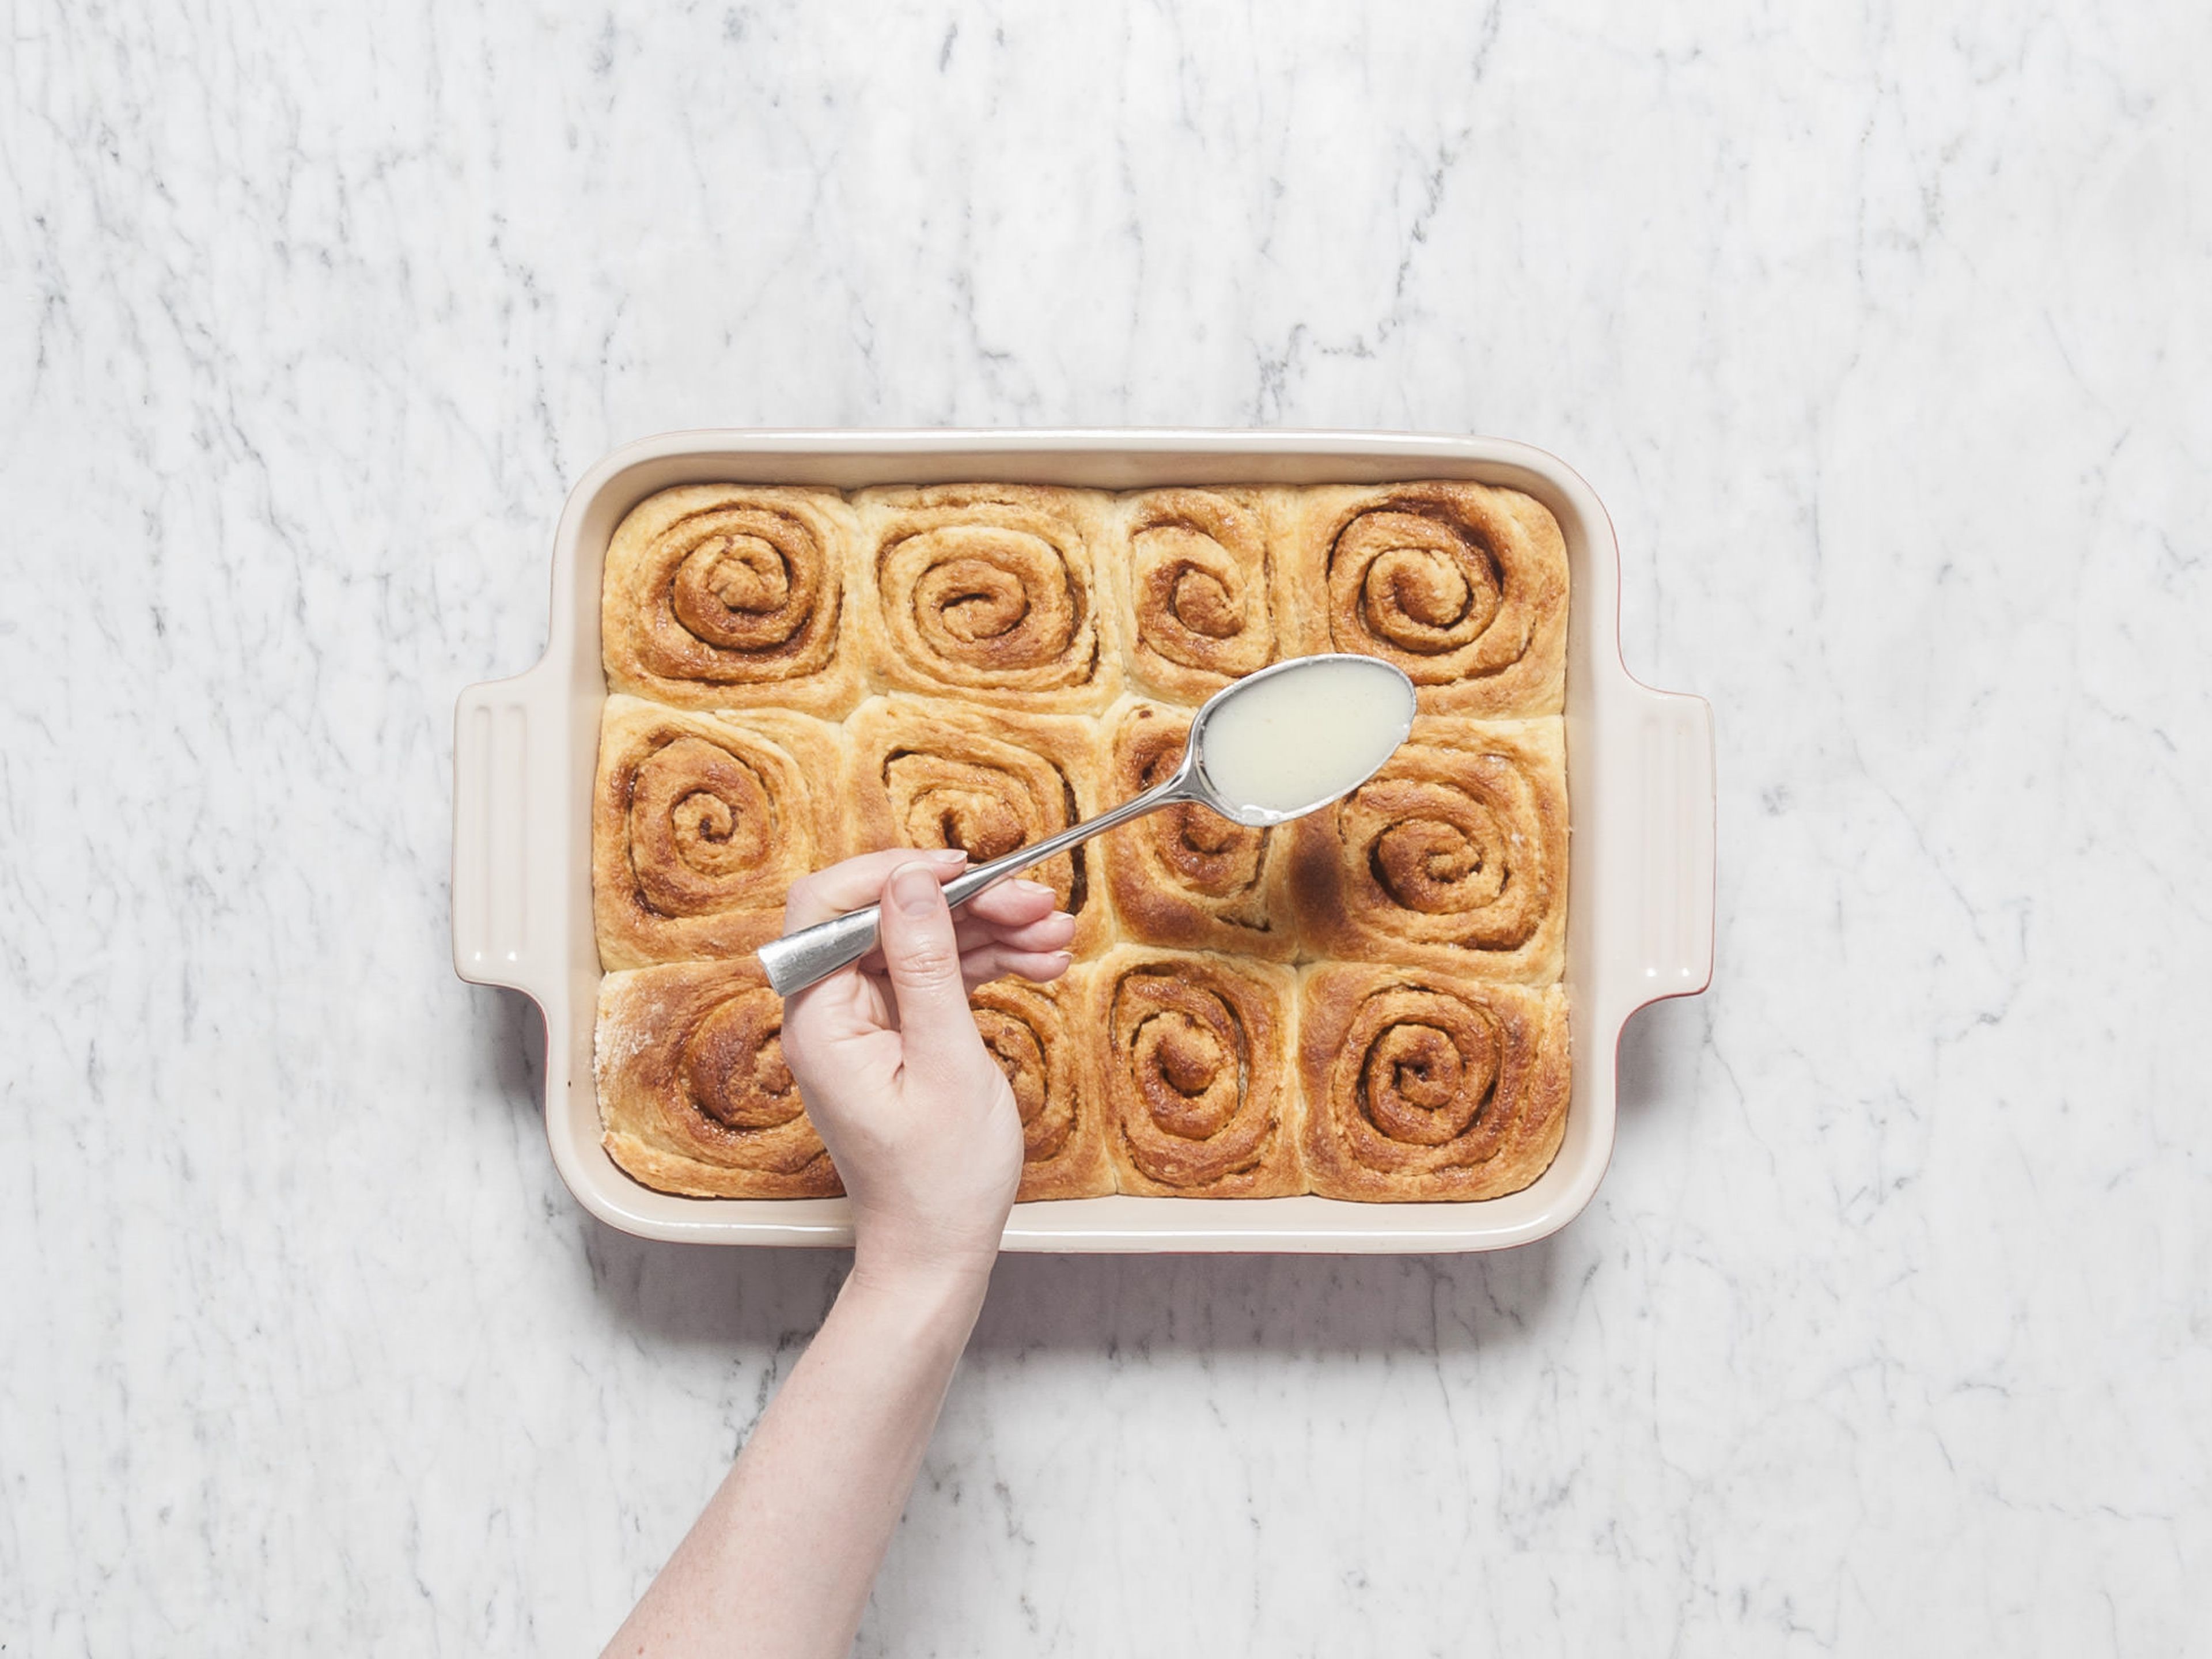 In the meantime, add confectioner’s sugar, remaining milk, remaining vanilla bean seeds, remaining salt, and cream cheese to a small mixing bowl and stir to combine. Drizzle over lukewarm cinnamon buns and enjoy!